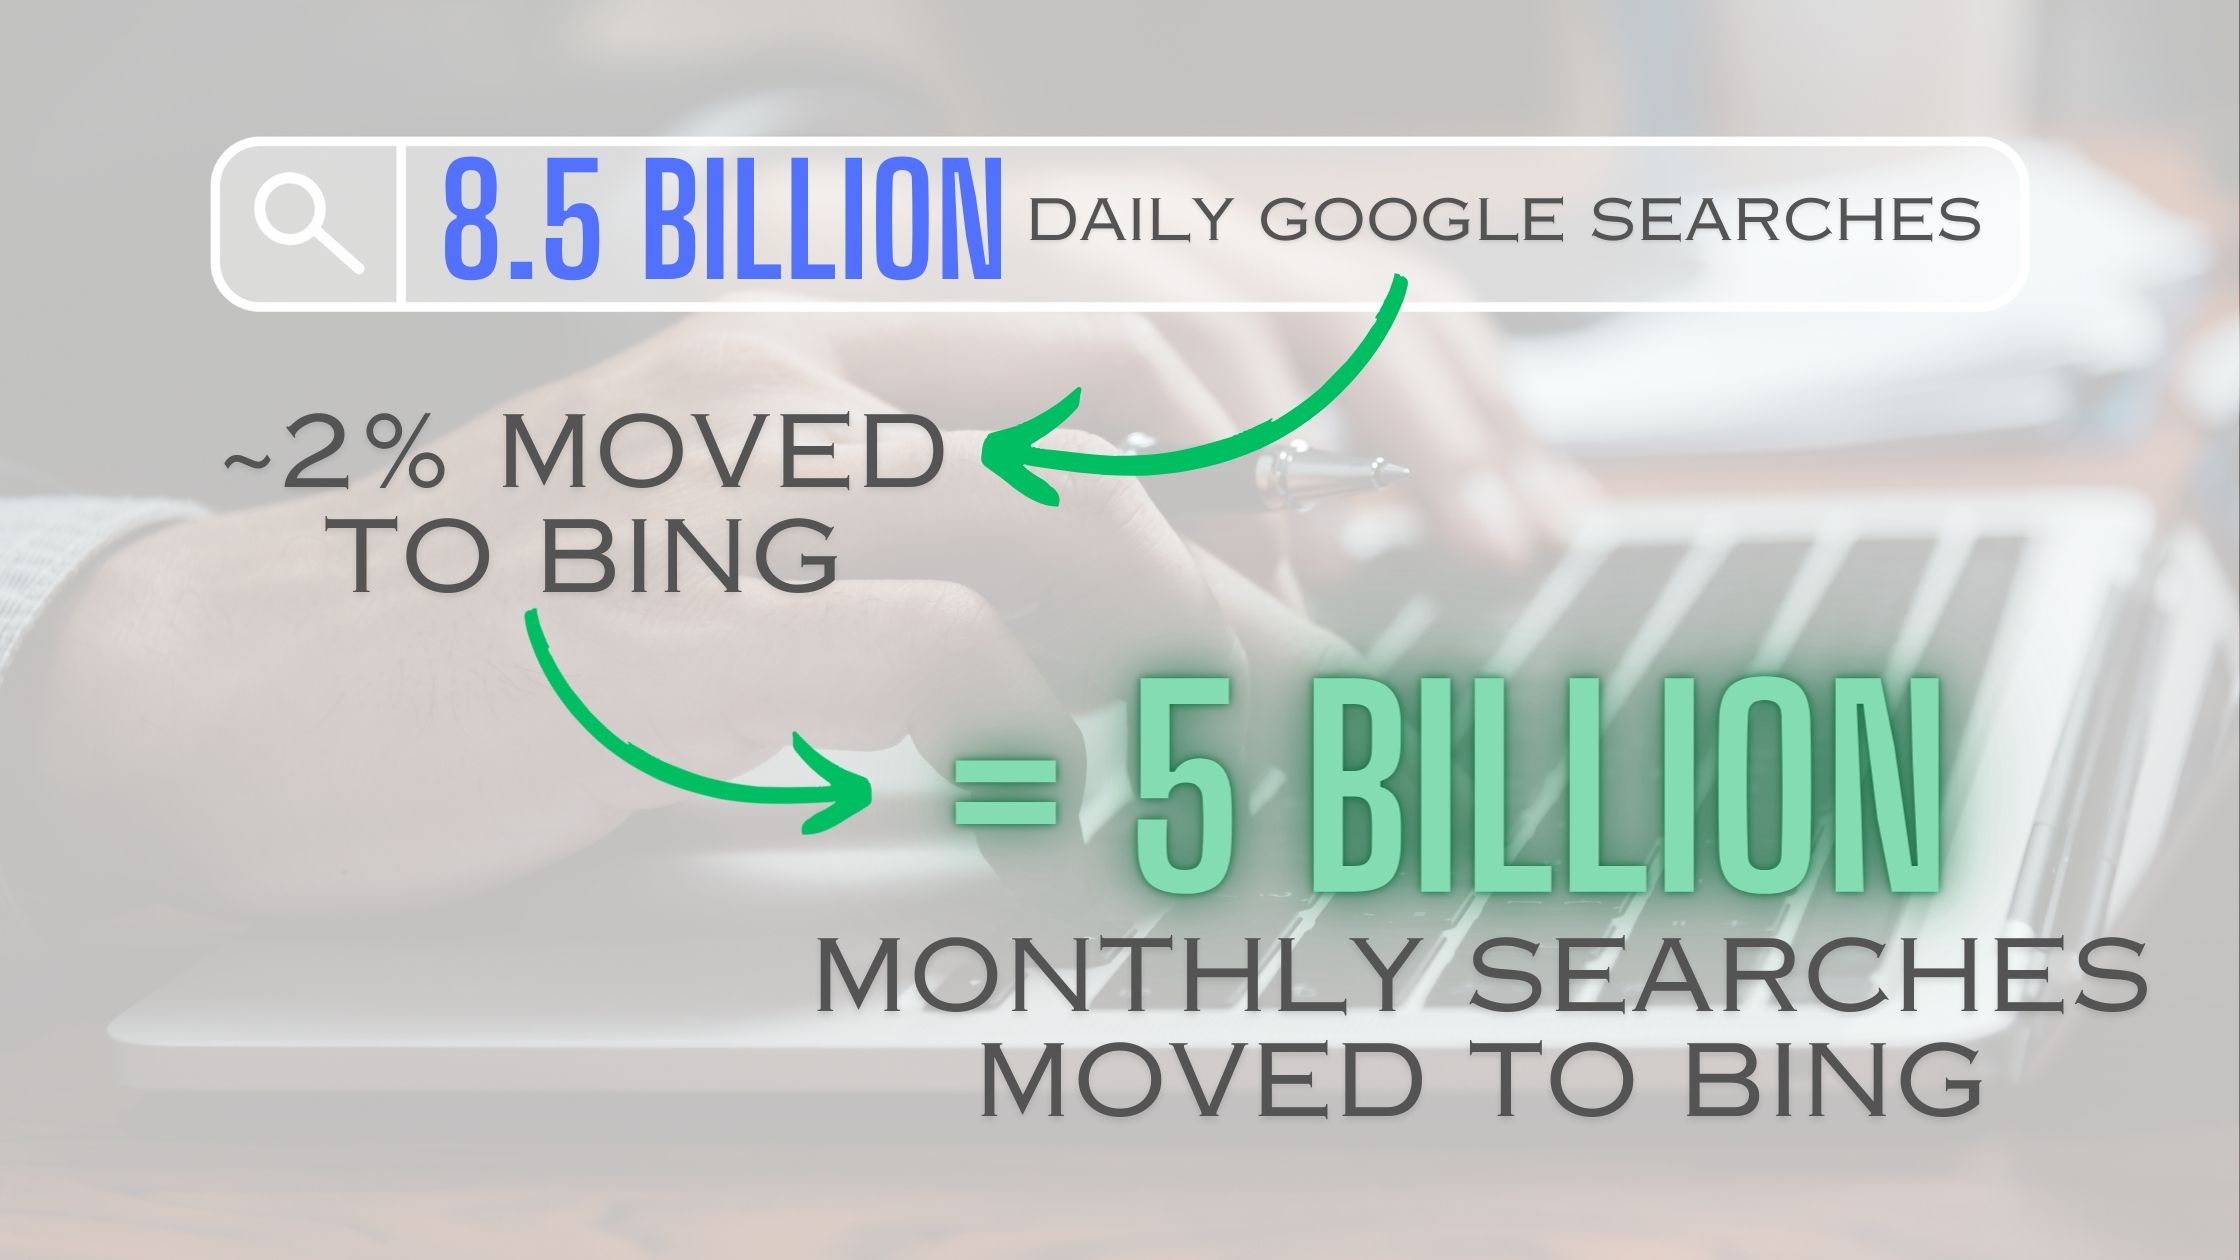 infographic showing 5 billion monthly searches moved to Bing